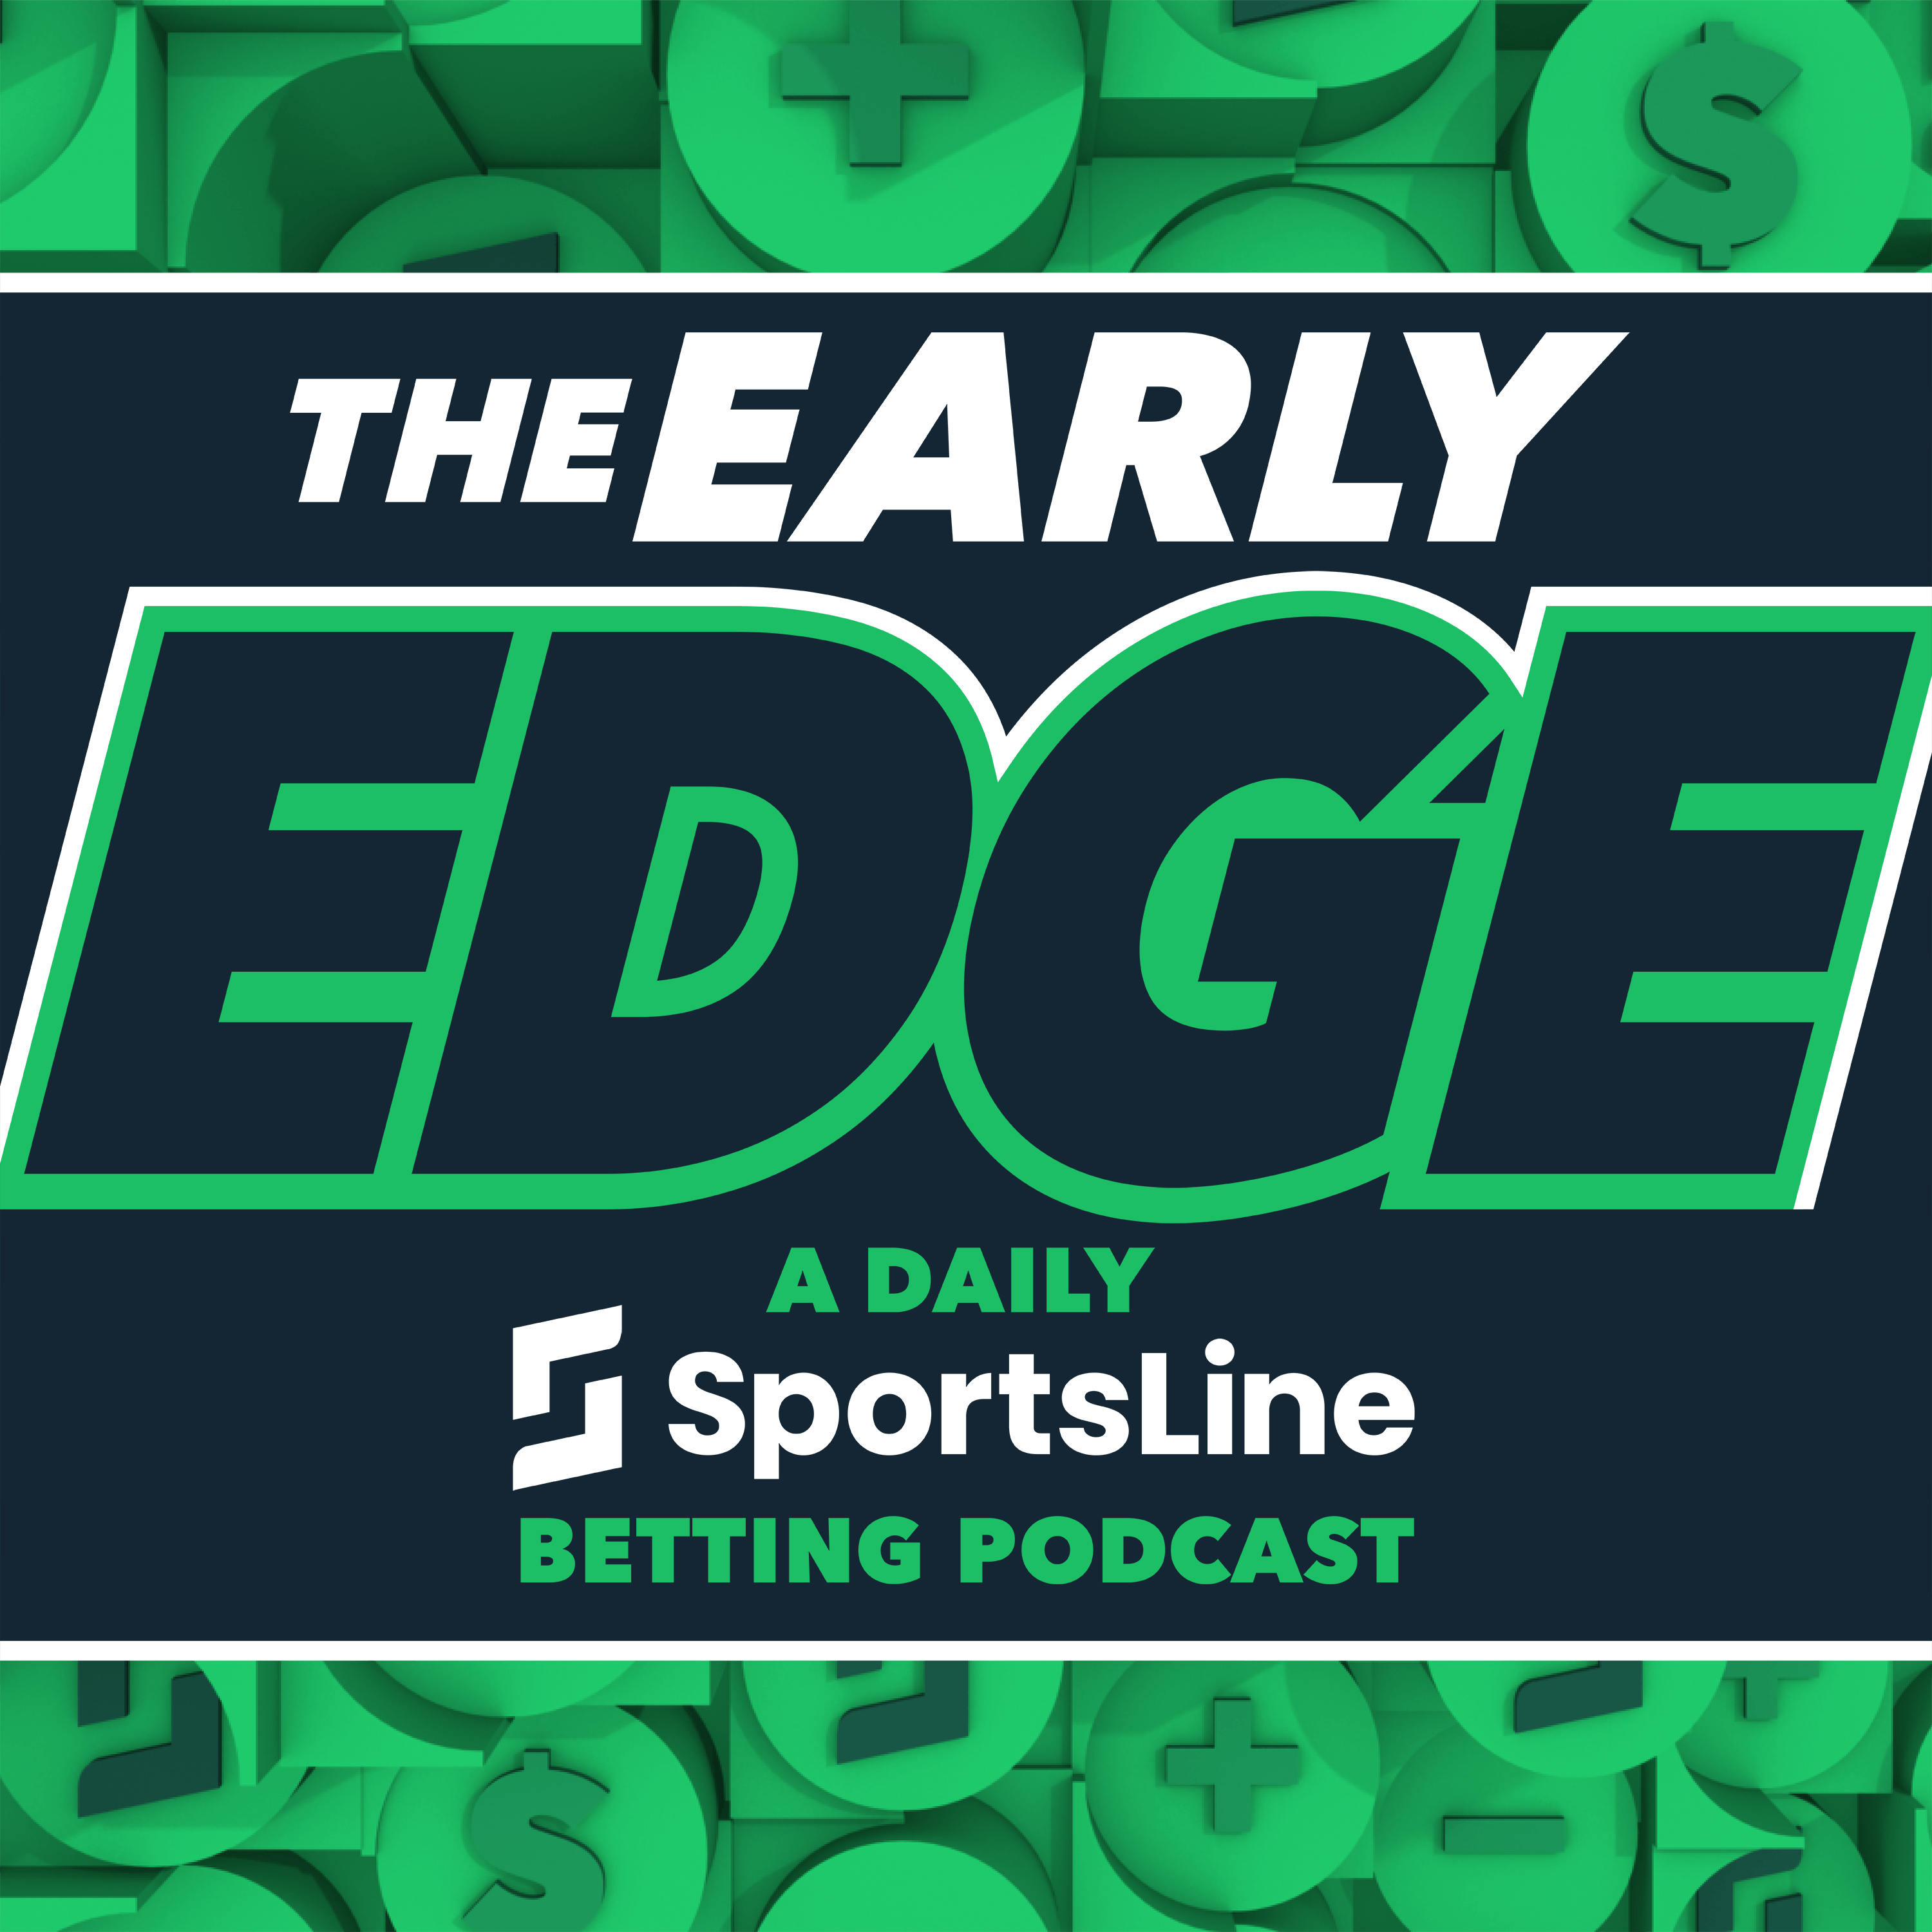 Monday's BEST BETS: Purdue - UConn National Championship Picks  + MLB Picks! | The Early Edge